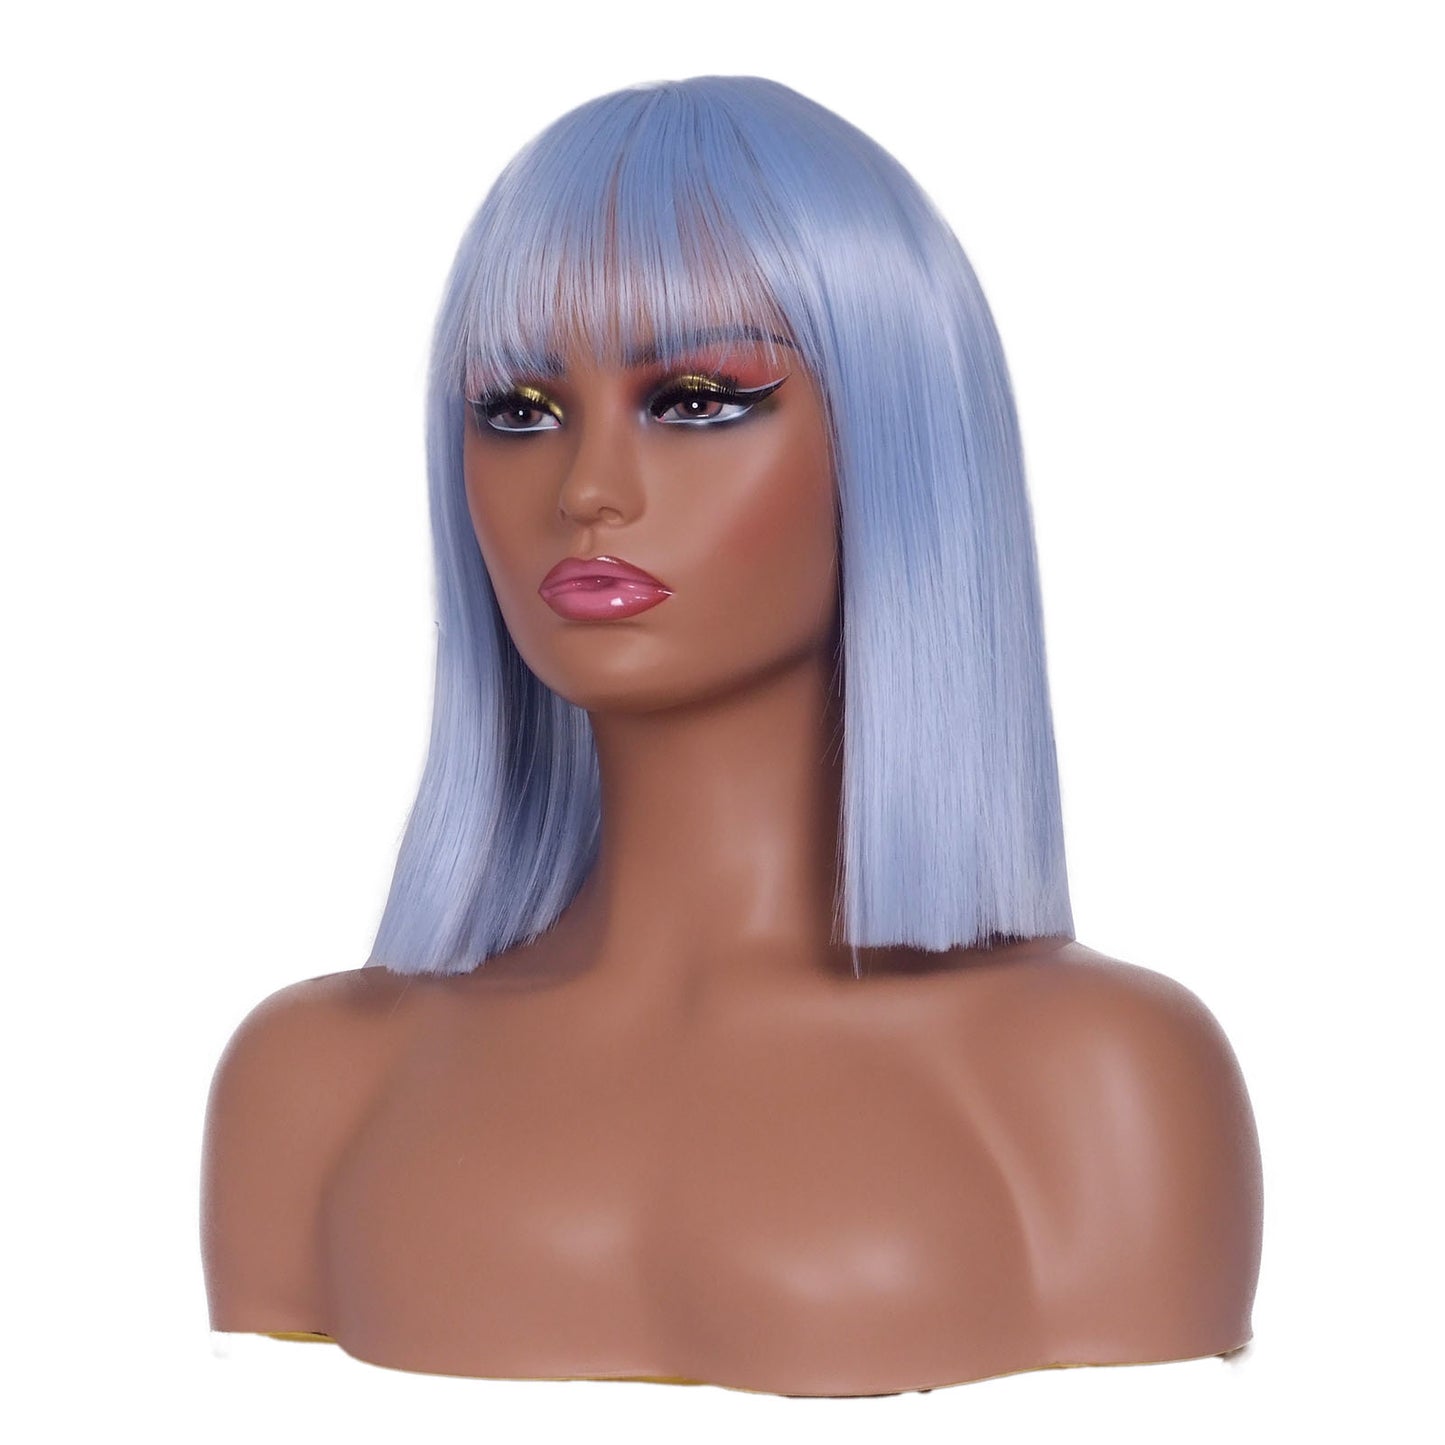 LINGDORA Light Blue Straight Short Wig with Bangs Cosplay